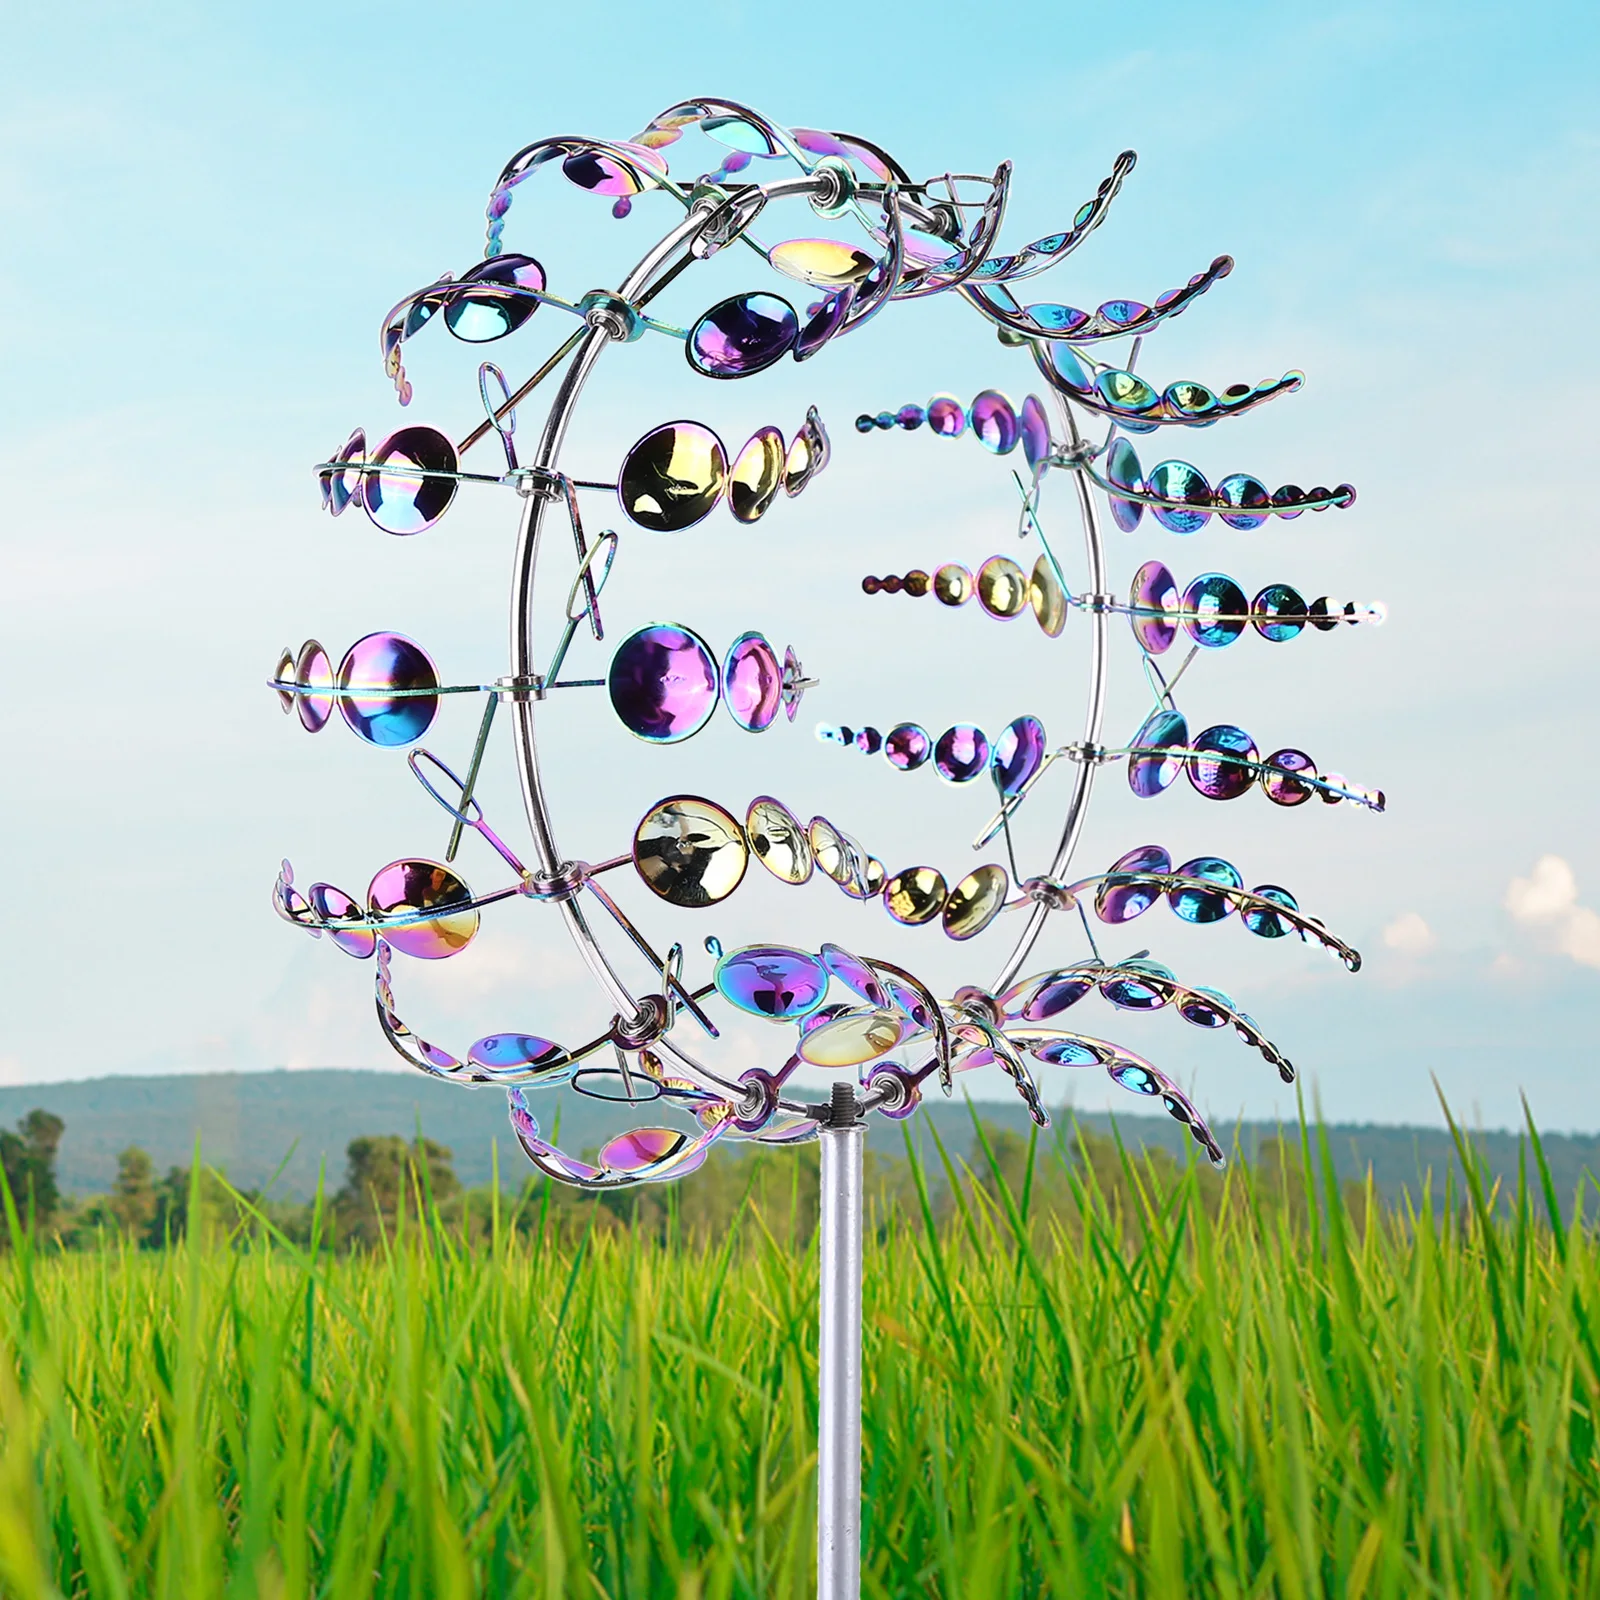 

Unique Magical Metal Colorful Windmill Garden Decoration Outdoor Wind Spinners Wind Catchers Kinetic Swivel for Yard Patio Lawn